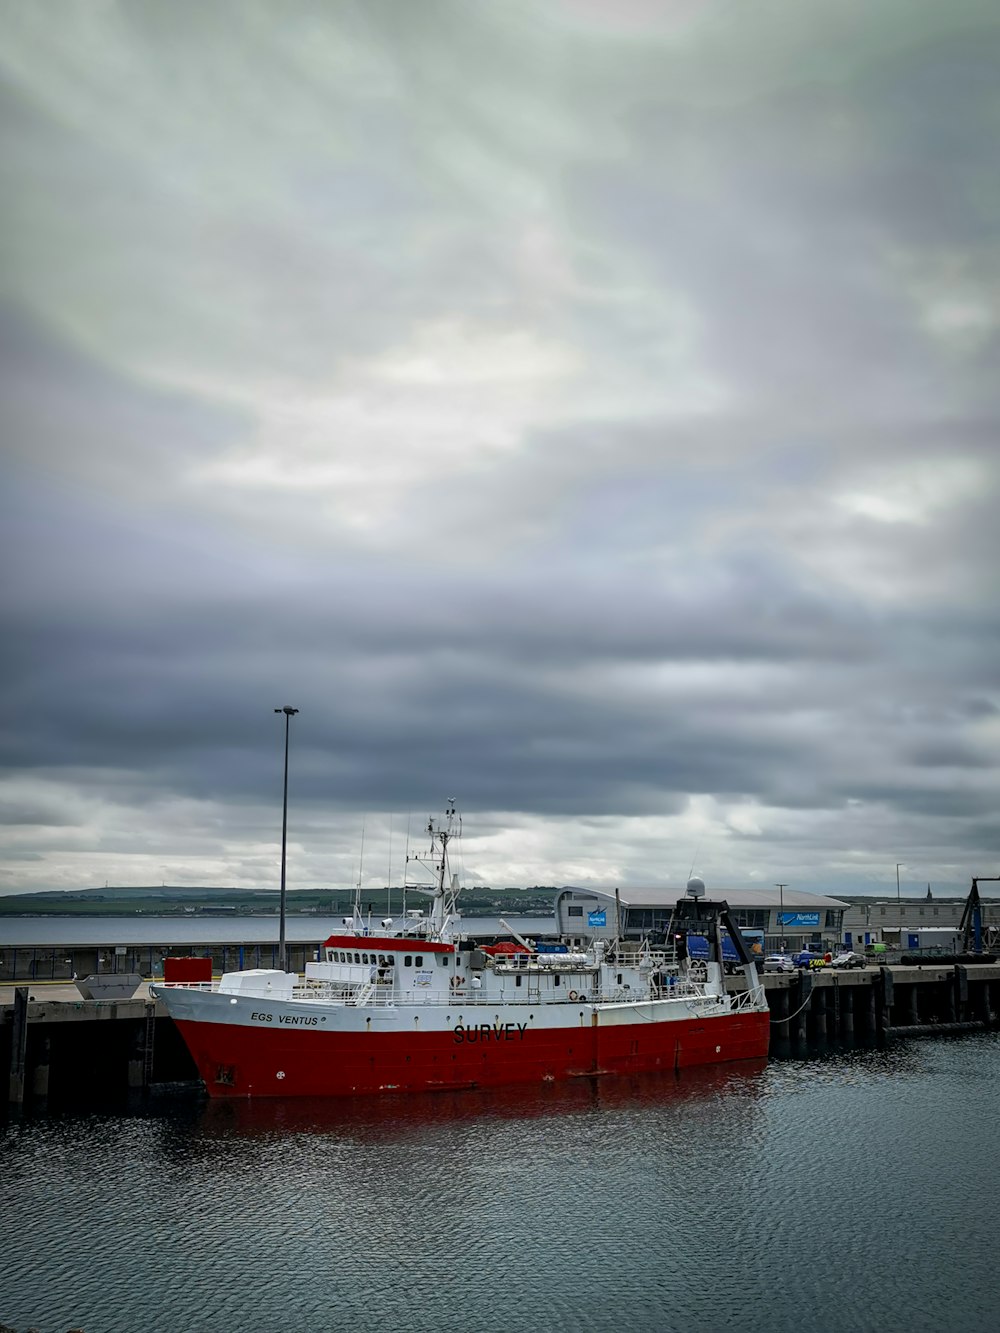 red and white boat on dock under cloudy sky during daytime